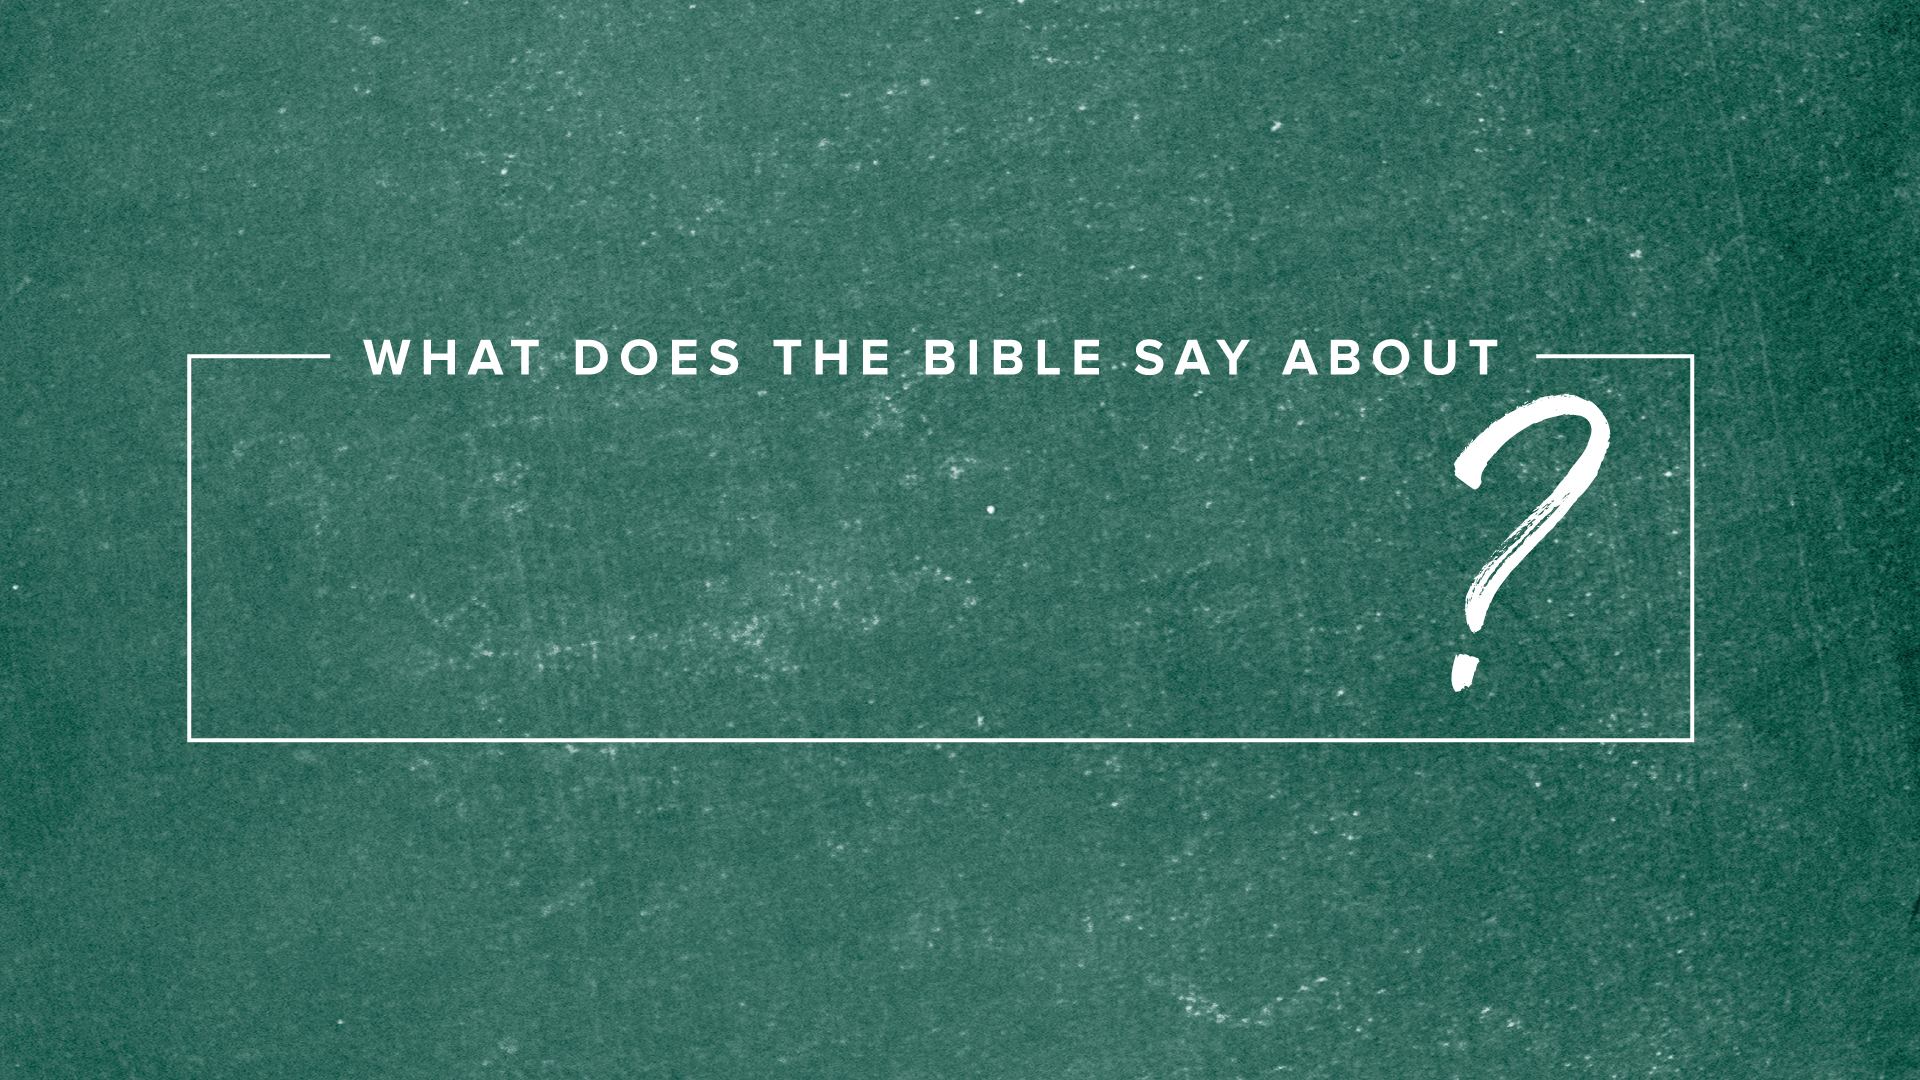 What Does The Bible Say About ___? Healing